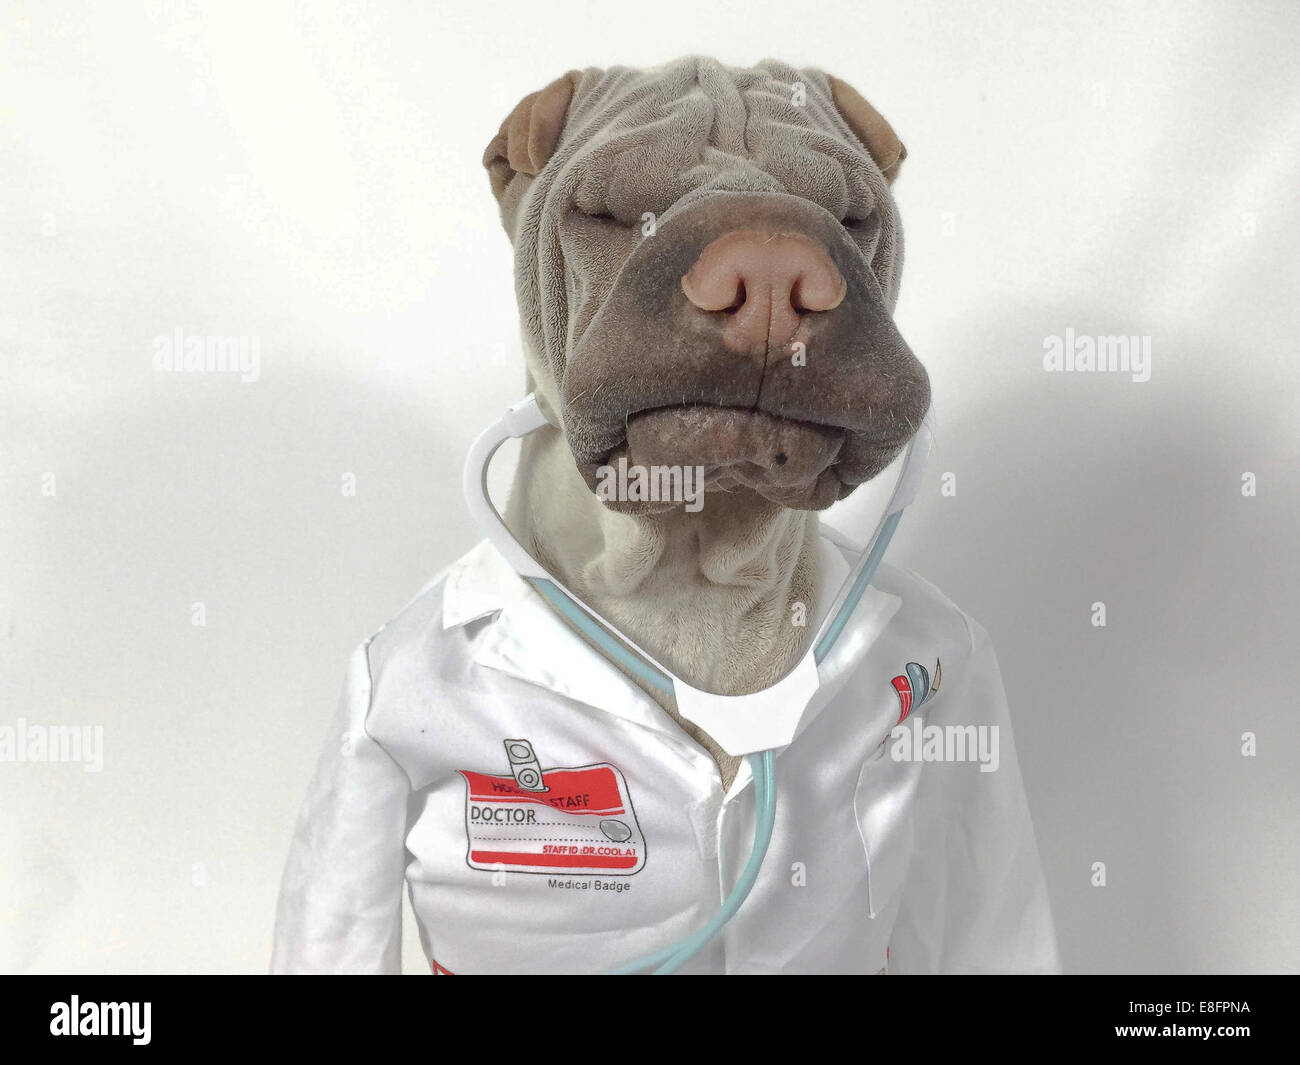 Shar pei dog dressed up as a doctor Stock Photo